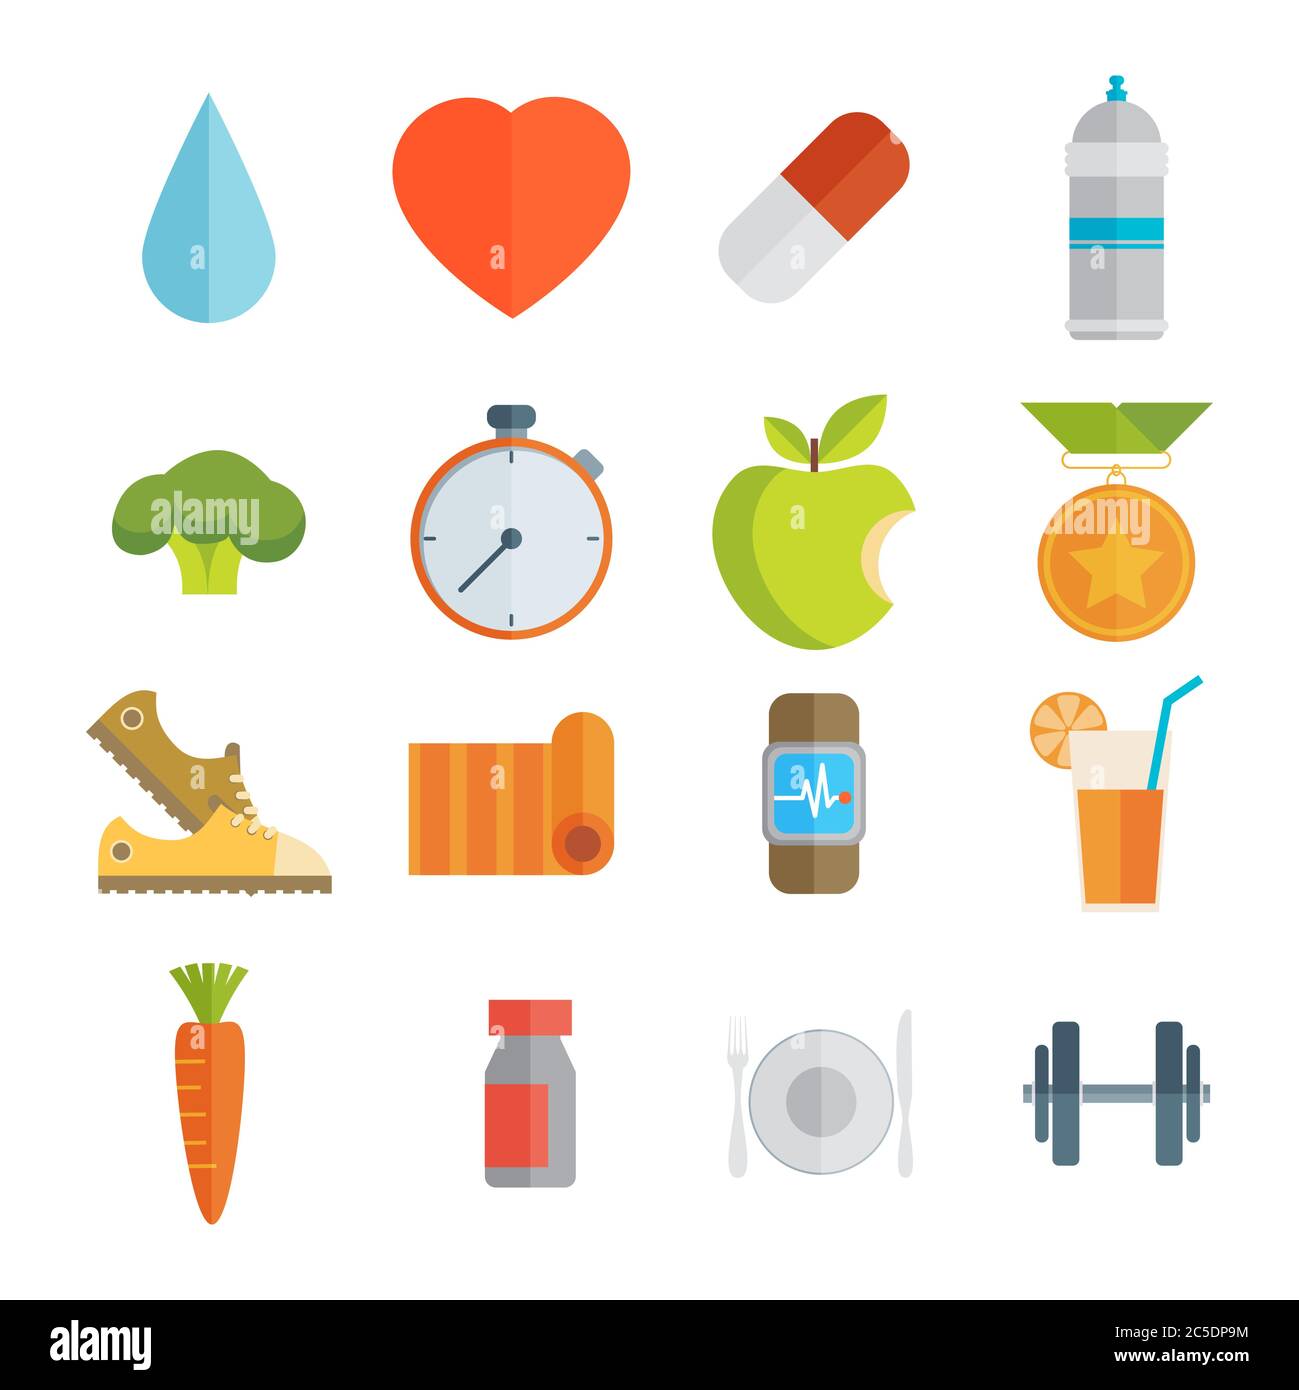 Sport and healthy life concept flat icon set of jogging, gym, food, metrics etc. Isolated vector illustration, modern design element Stock Vector